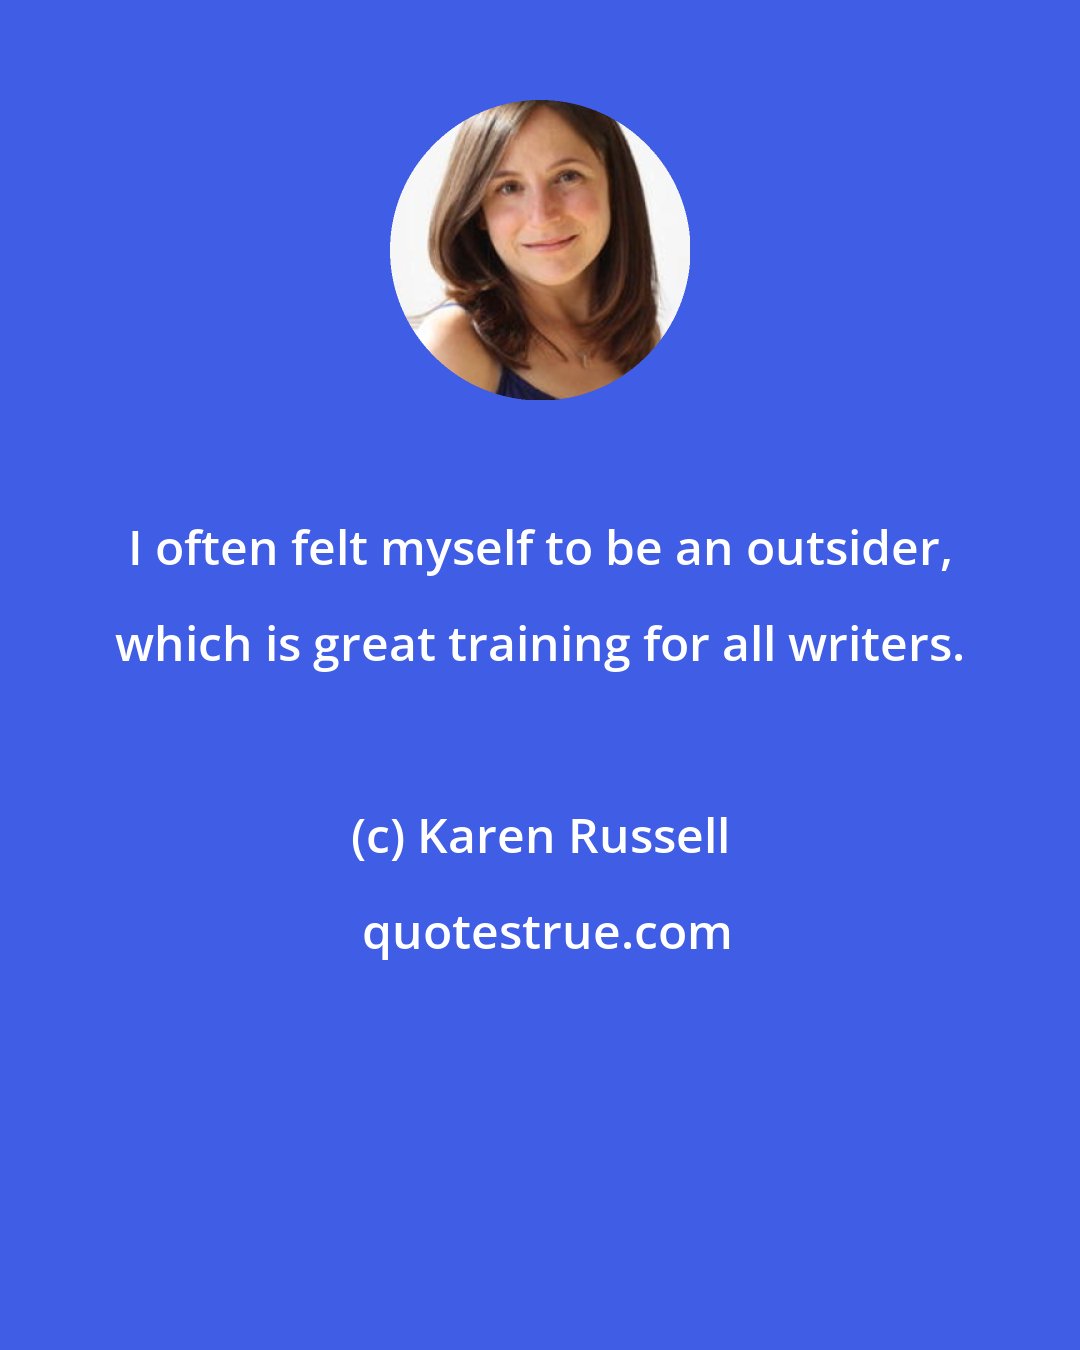 Karen Russell: I often felt myself to be an outsider, which is great training for all writers.